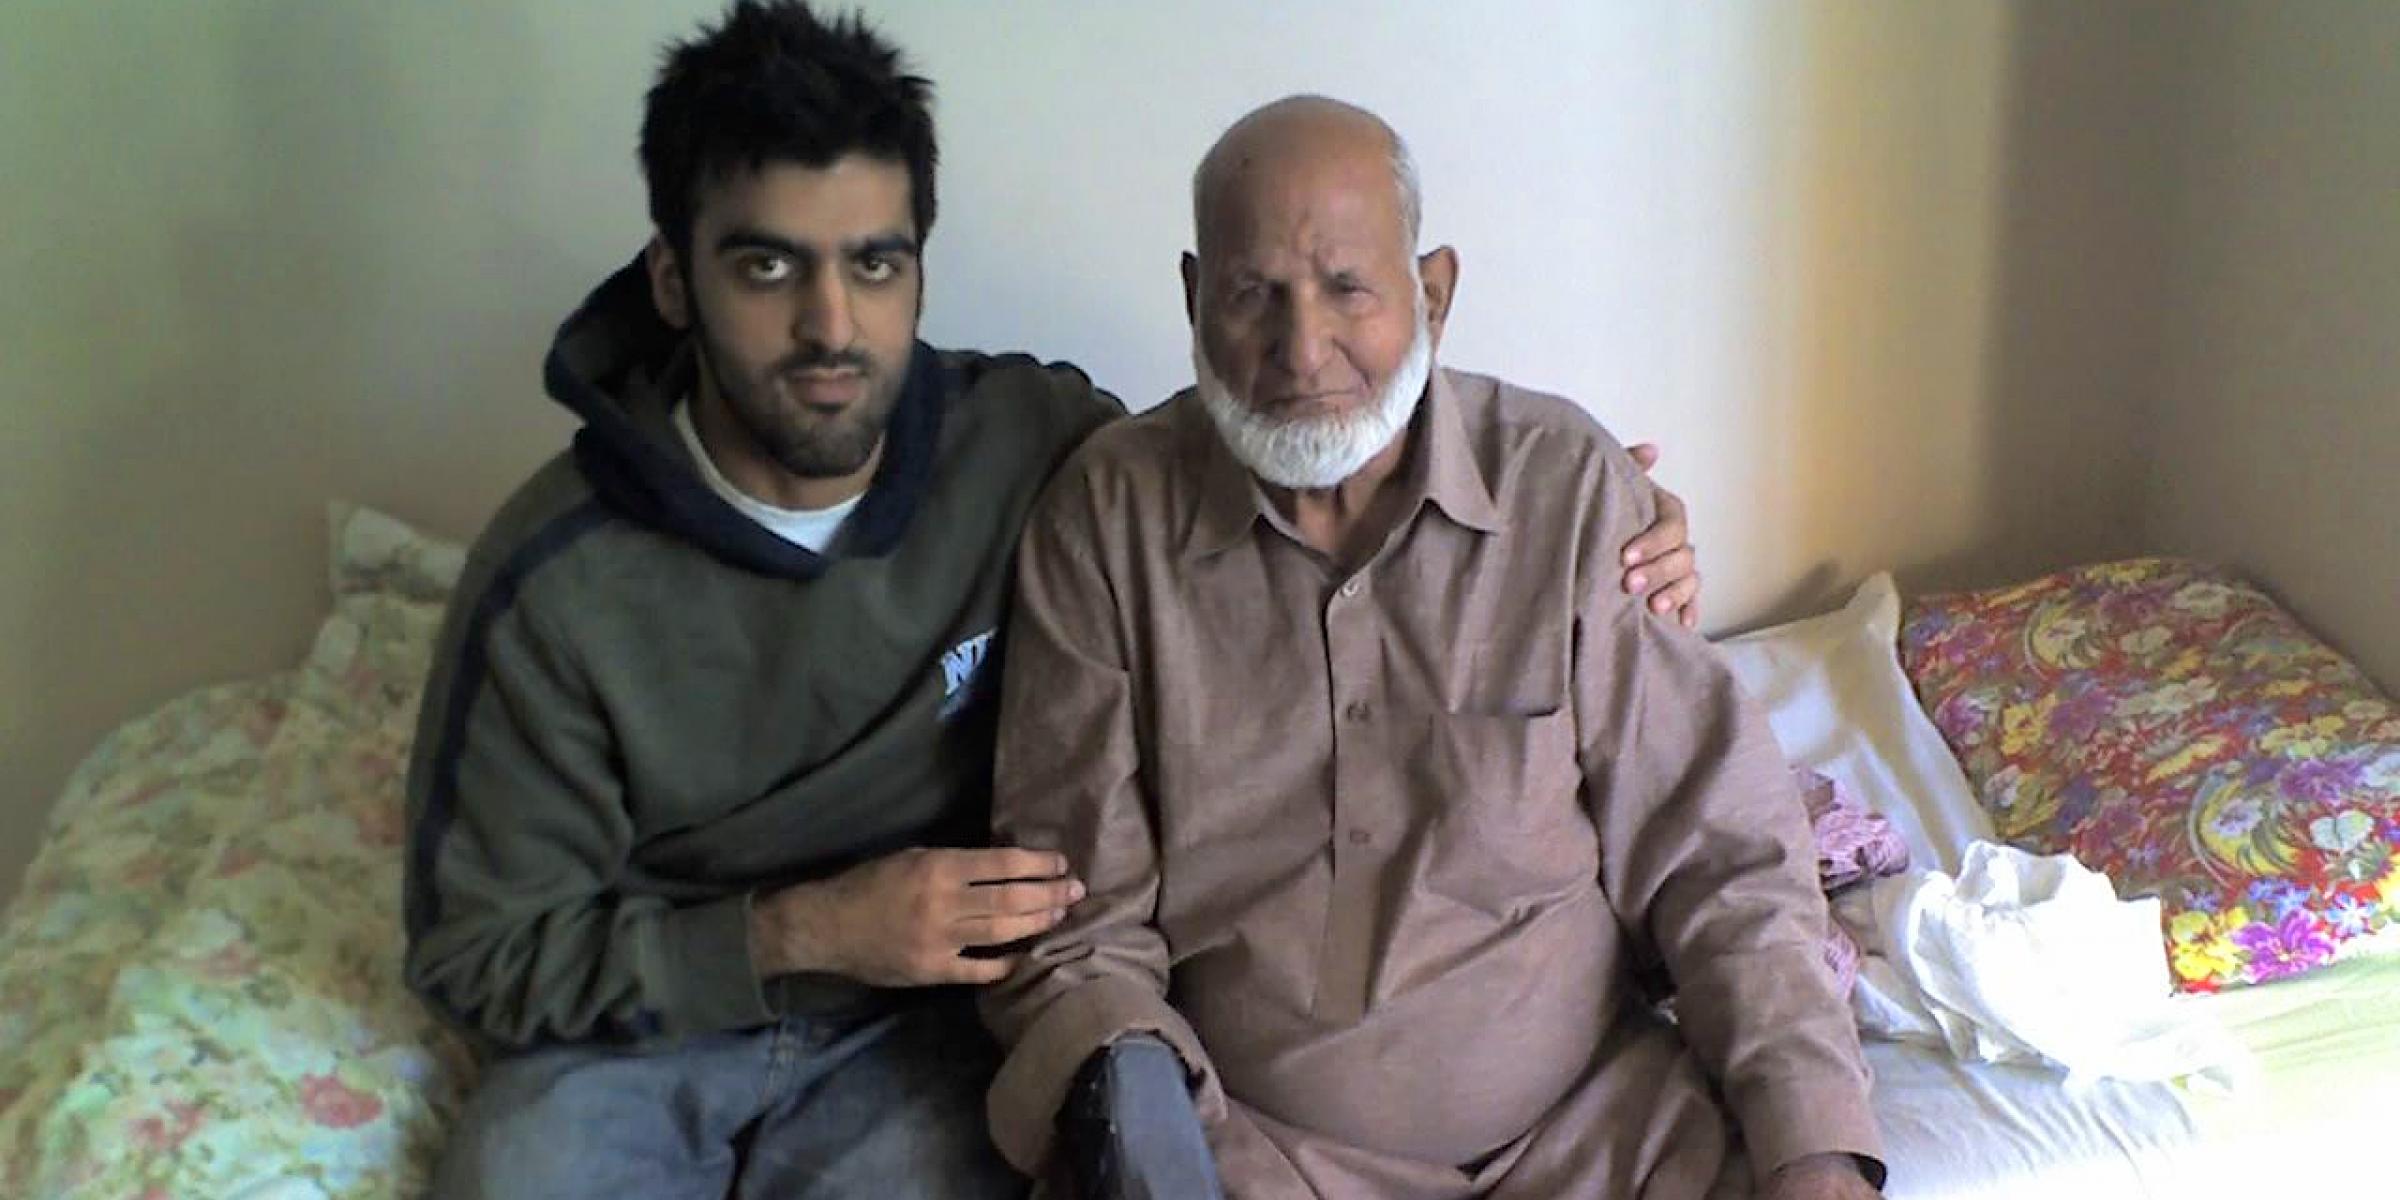 Khalid and his grandfather